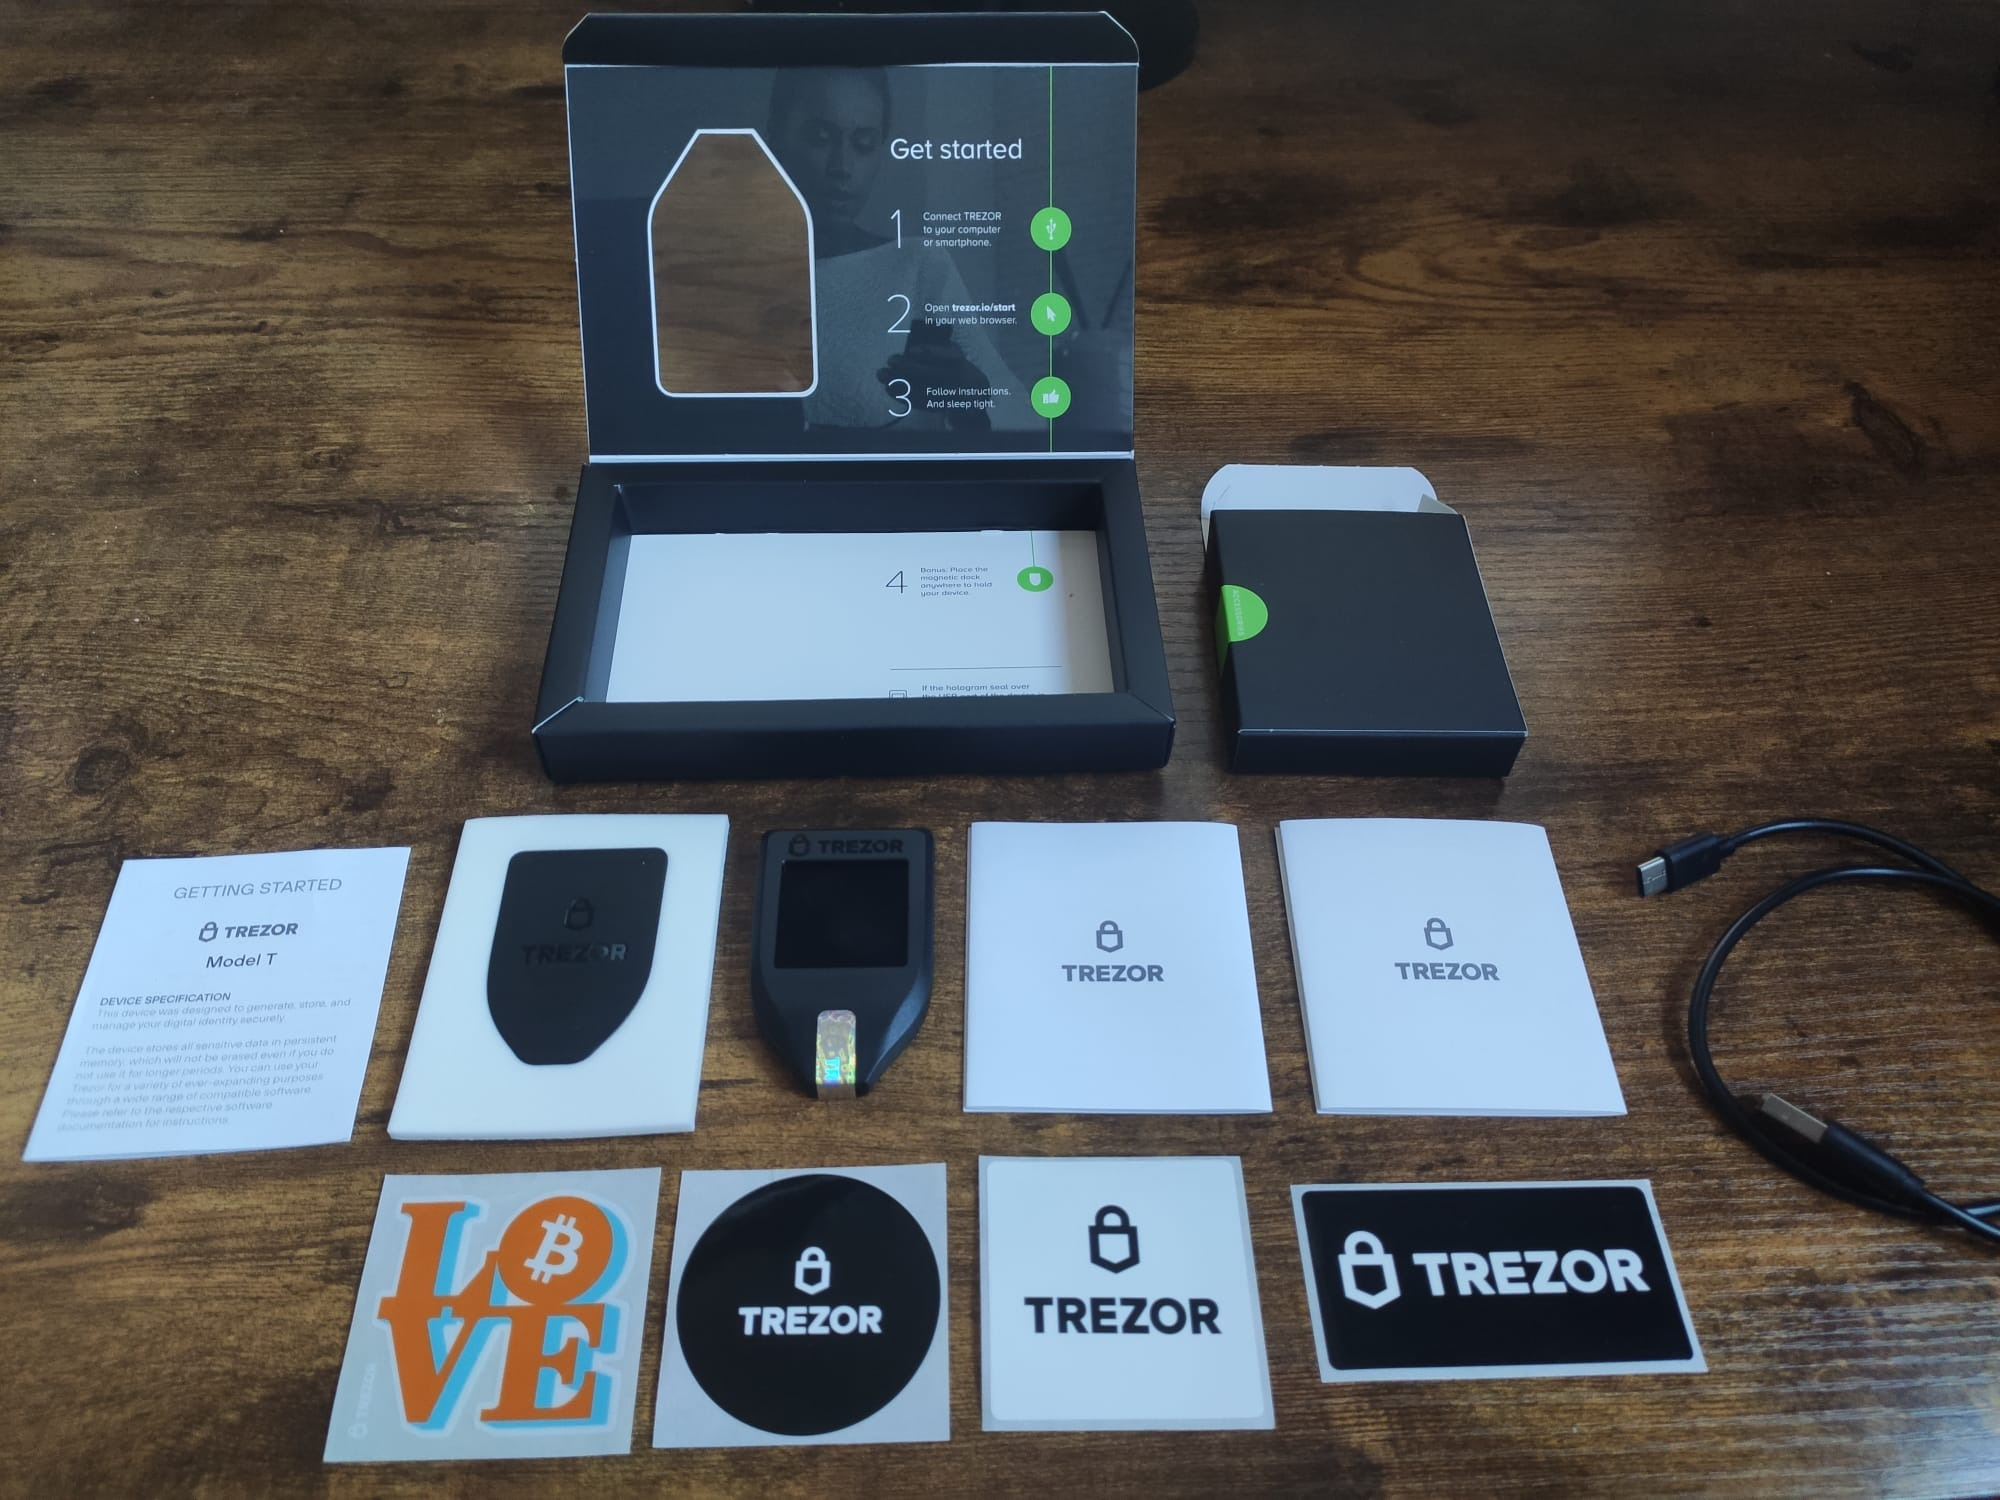 How to Safely Buy, Unbox and Set Up a Trezor Model T